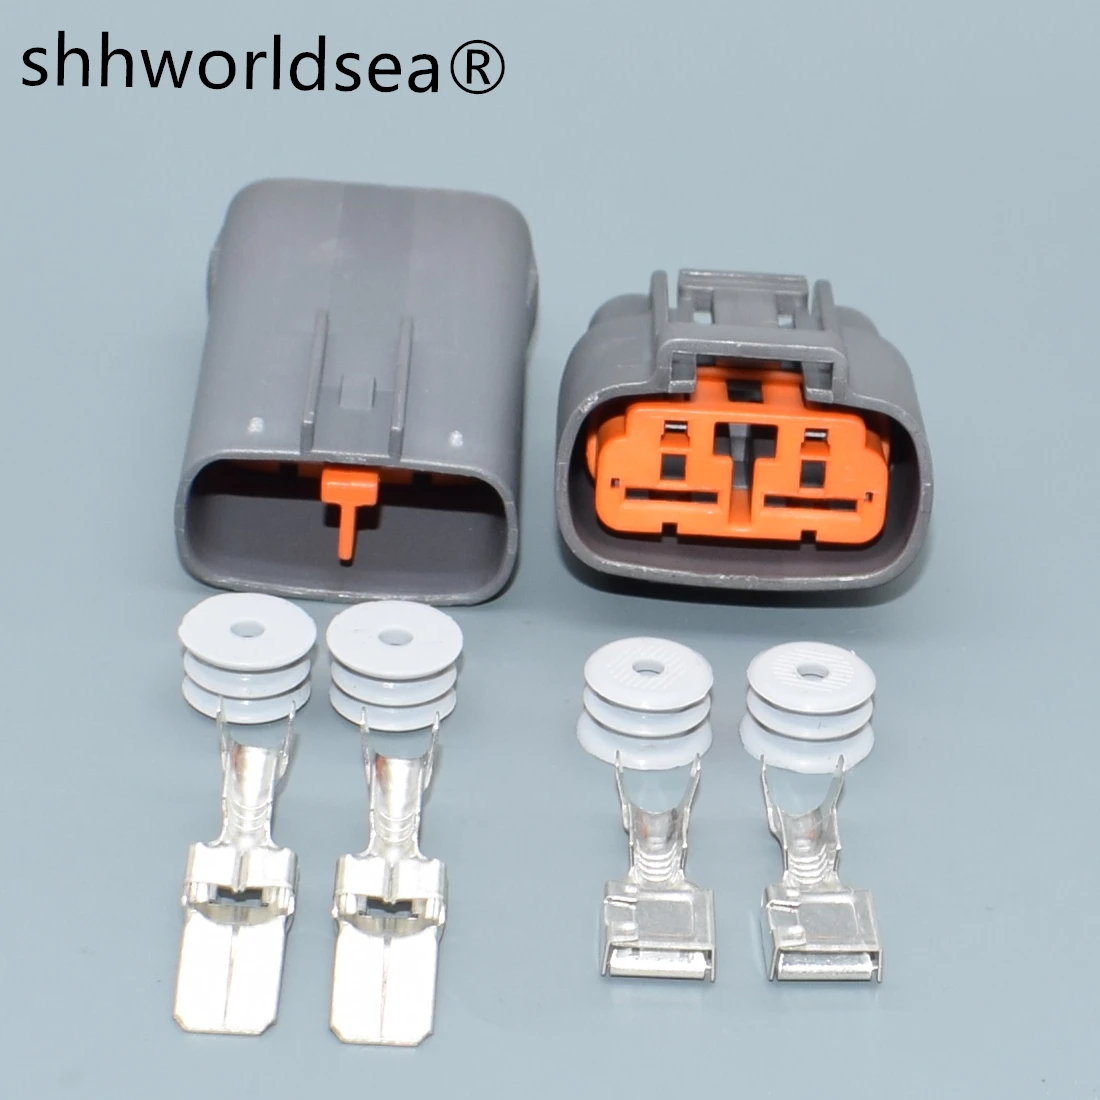 

shhworldsea 2 Pin sealed series 7.8mm Automotive Connector male or female cable connector 6195-0060 6195-0057 for Mazda